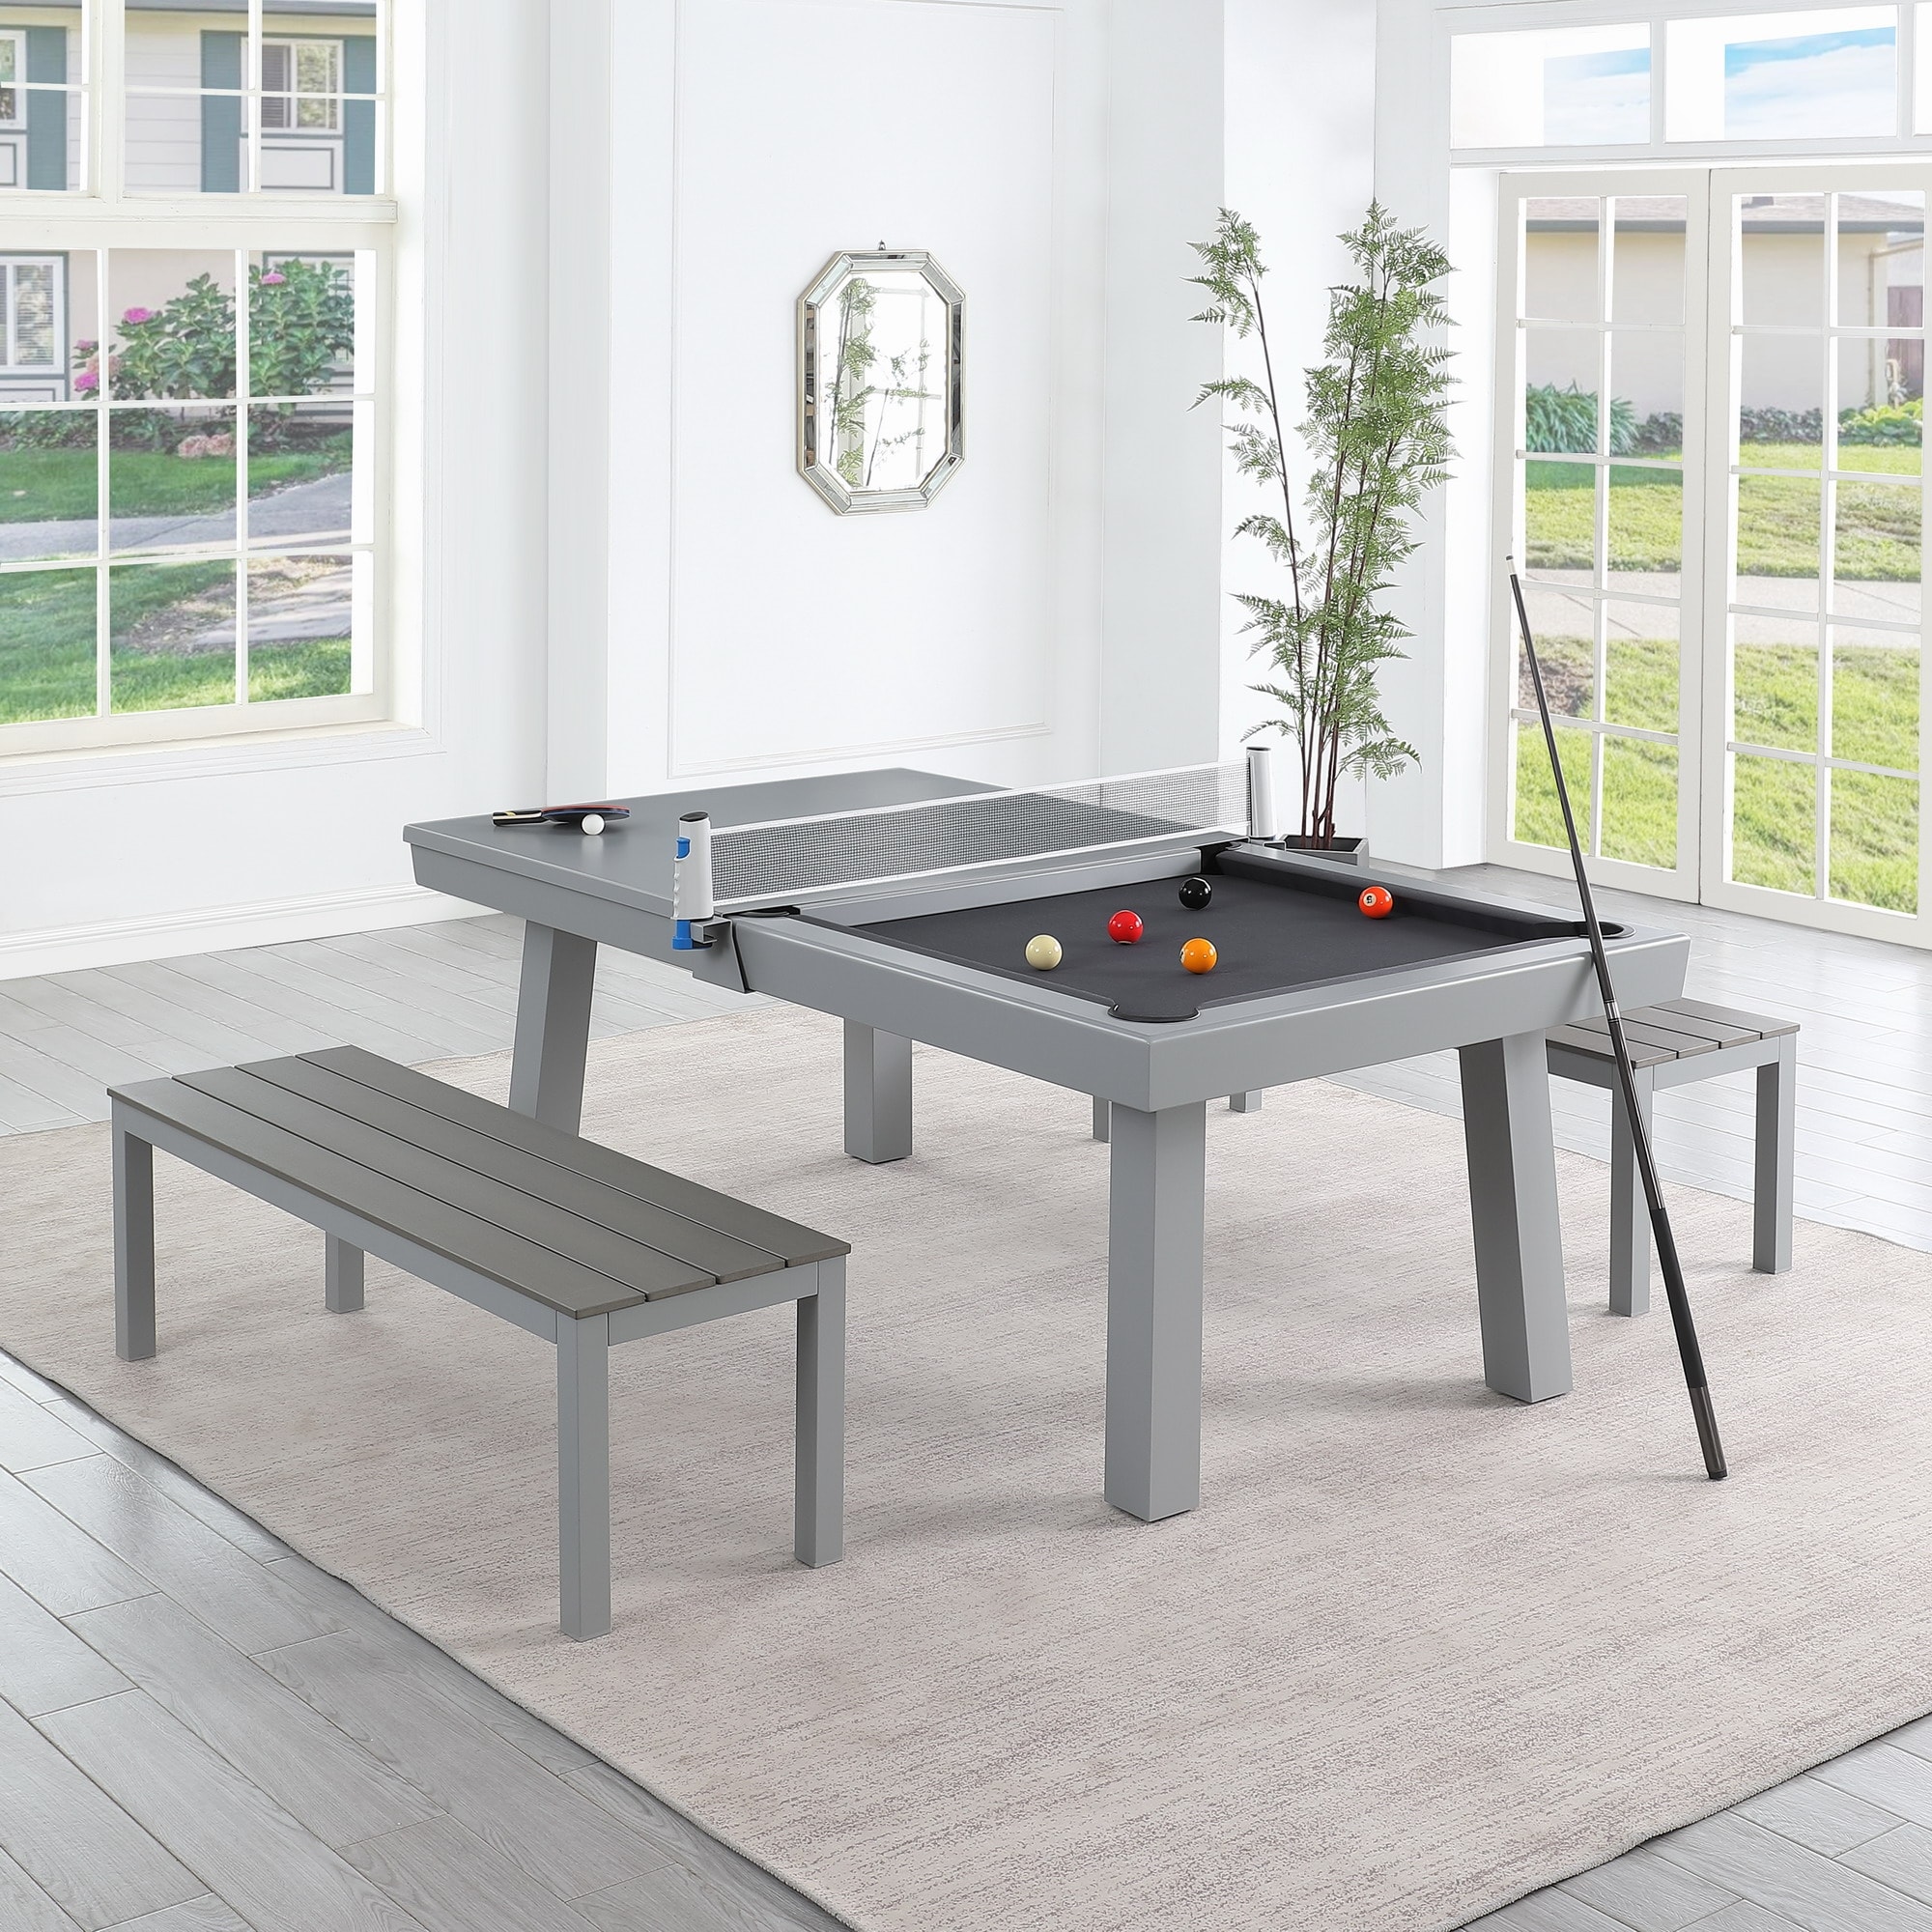 Newport Outdoor Patio 7ft Slate Pool Table Dining Set With 2 Benches and Accessories  Cement Finish